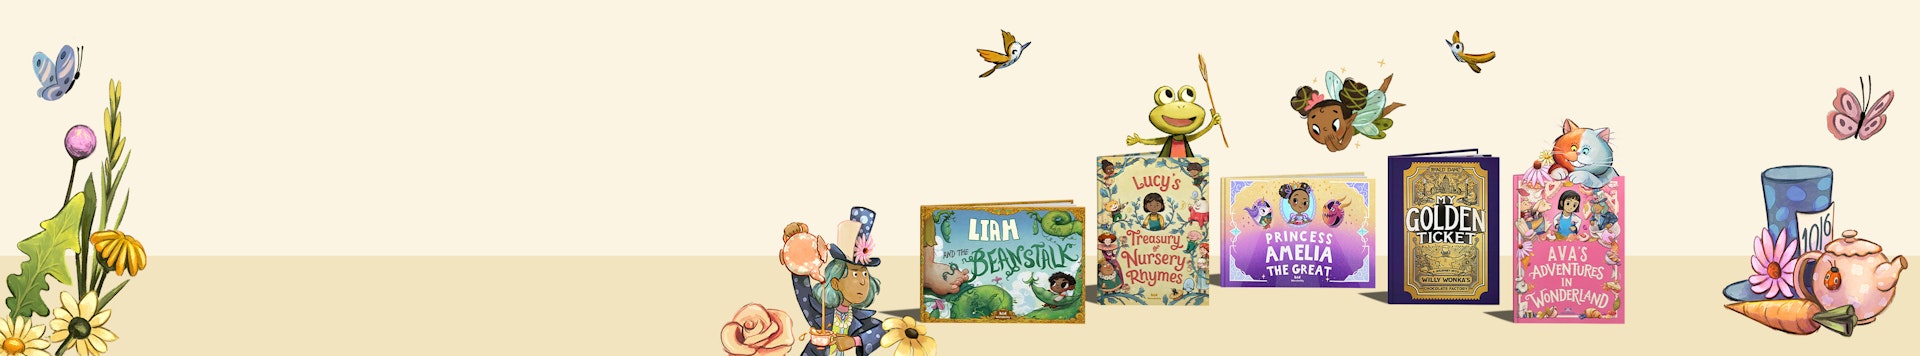 collection of wonderbly books based on classic children's stories 